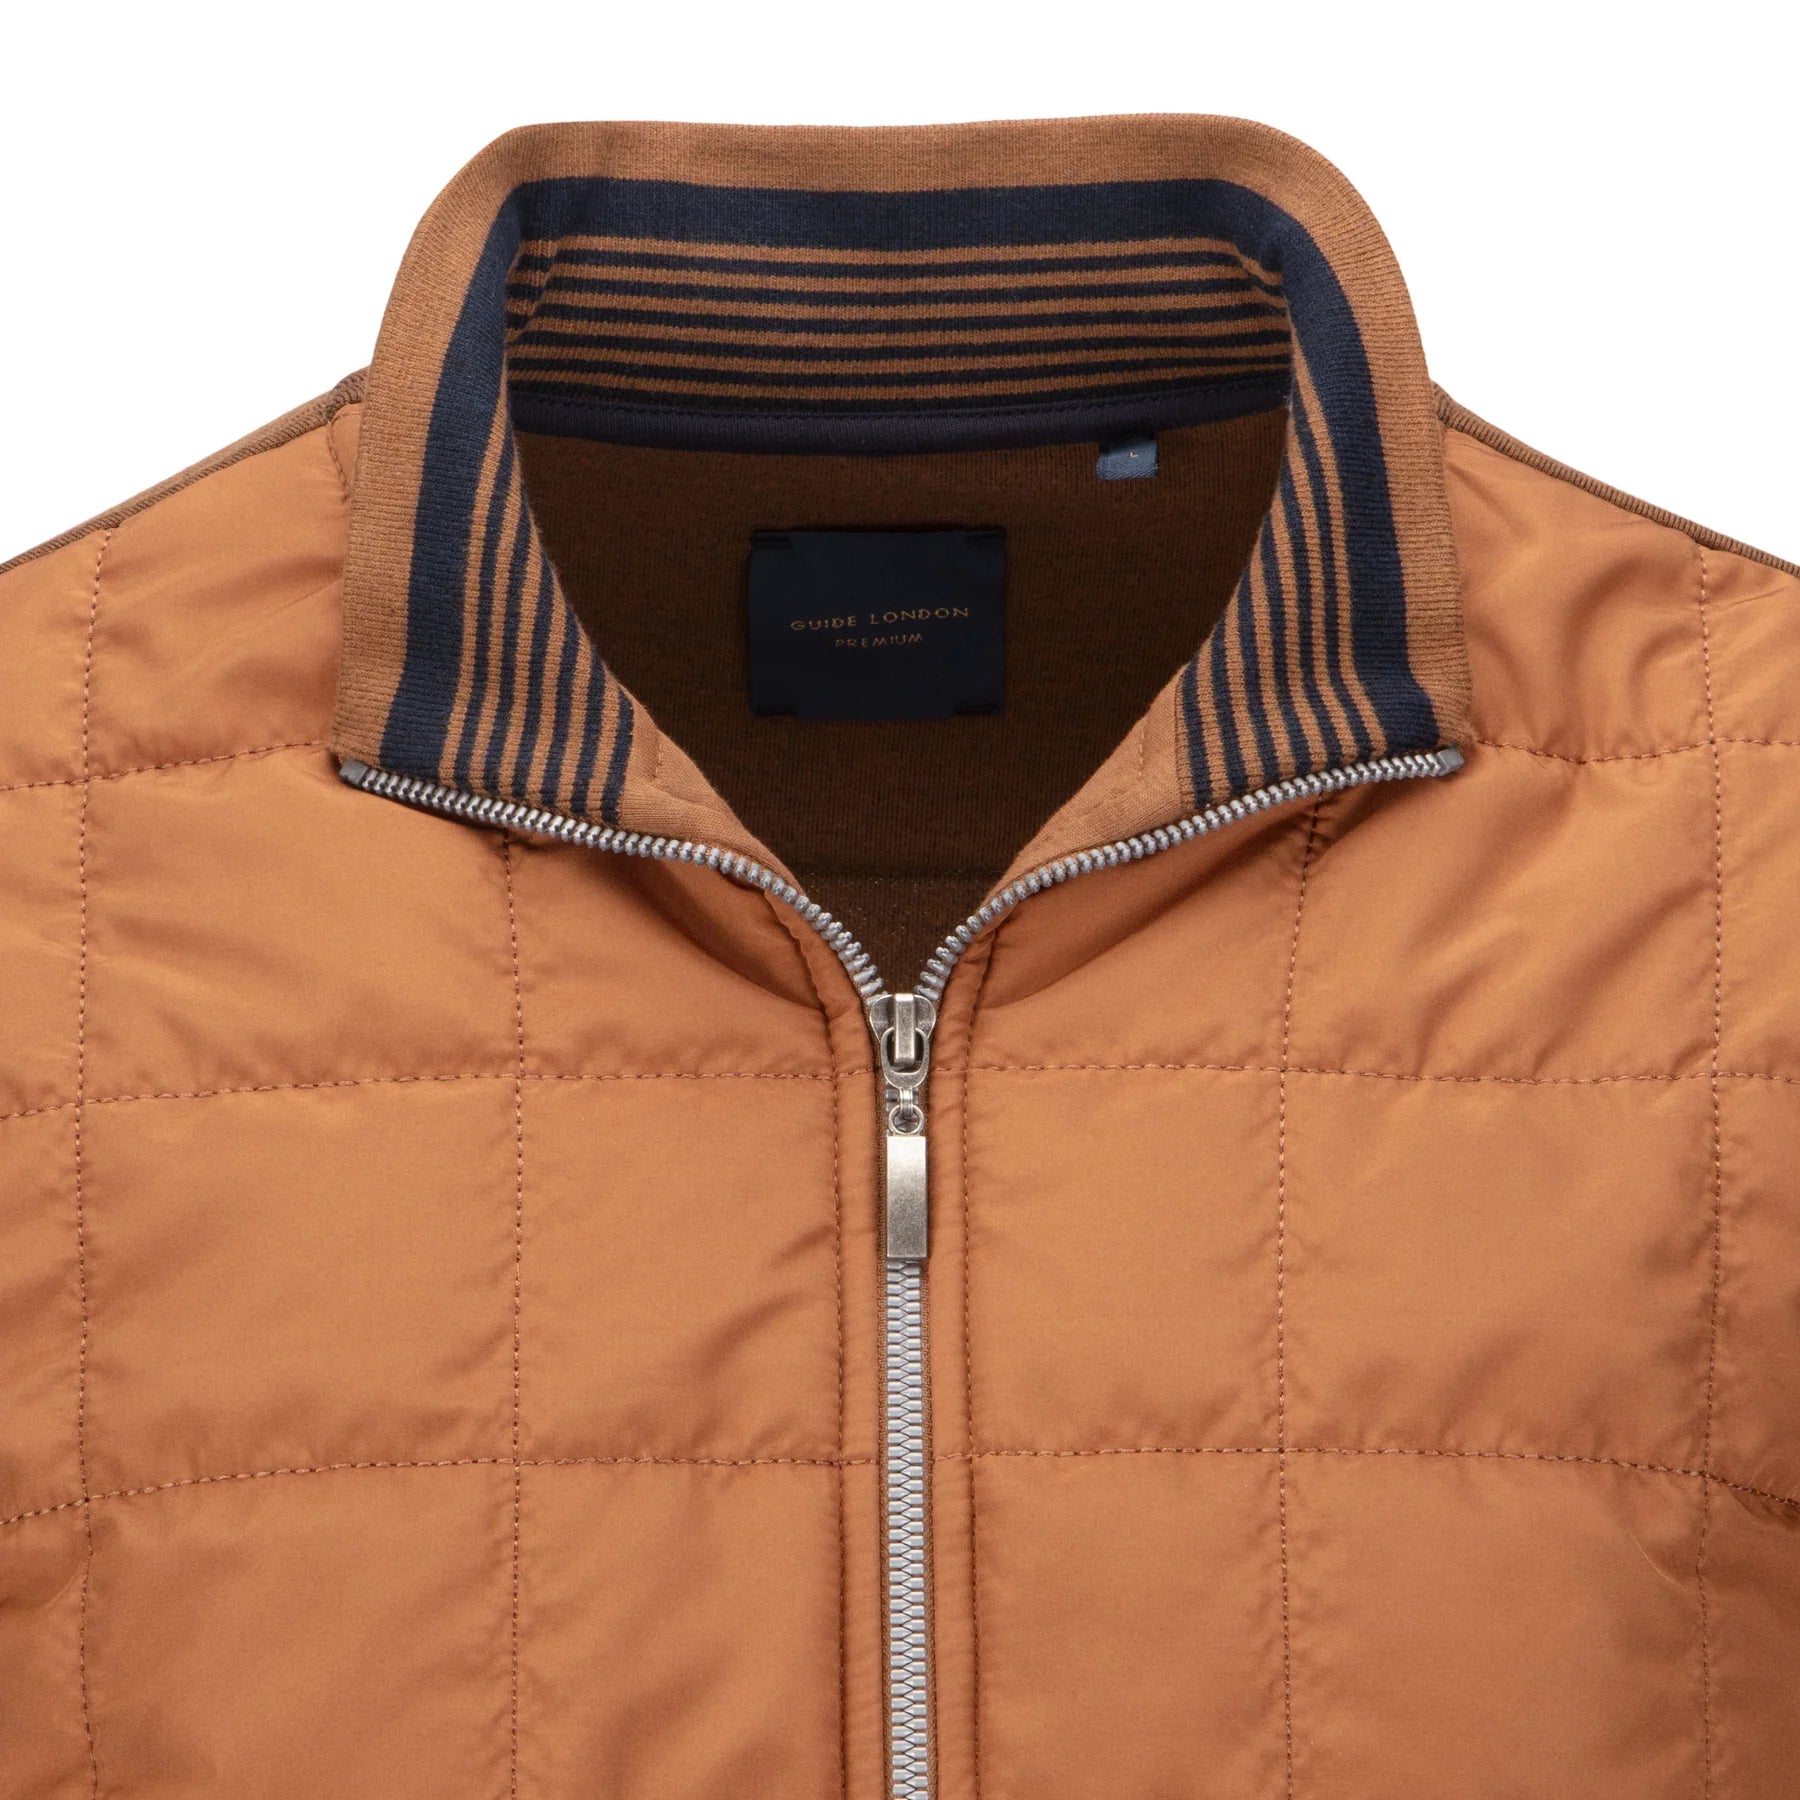 Guide London Camel Quilted Front Hybrid Sweater (SW1036)